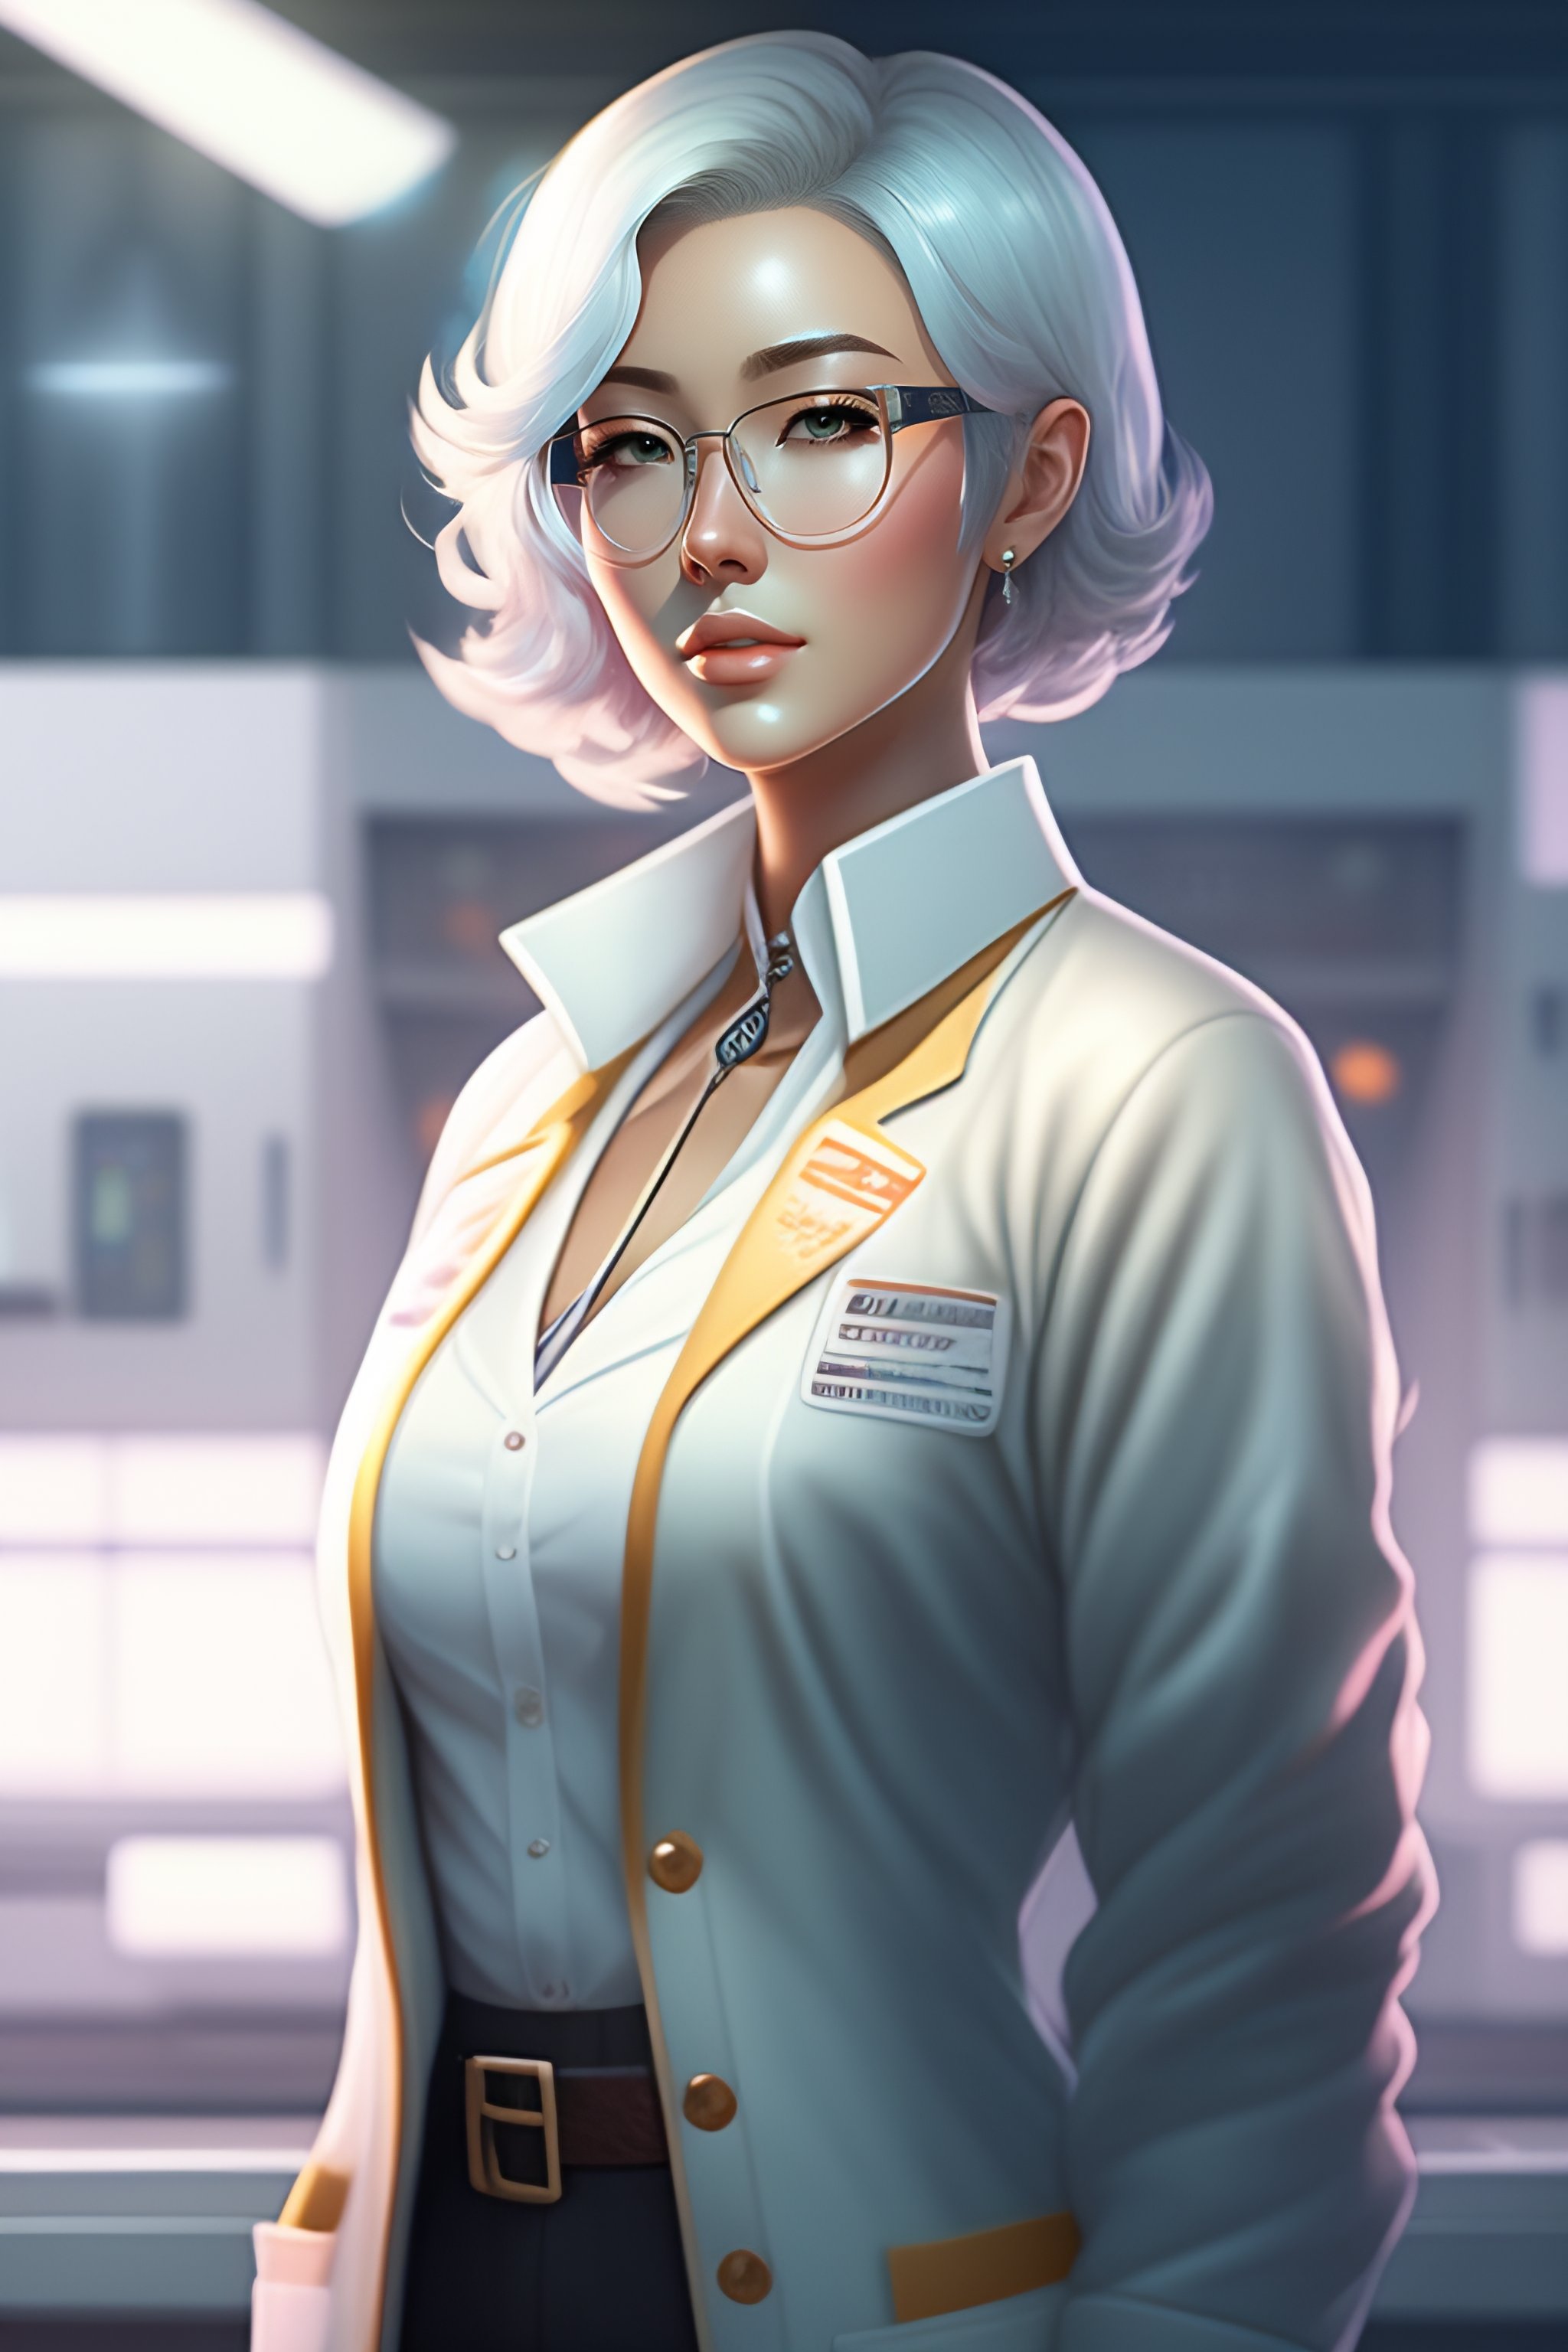 Lexica - Beautiful anime girl with short white hair, wearing lab